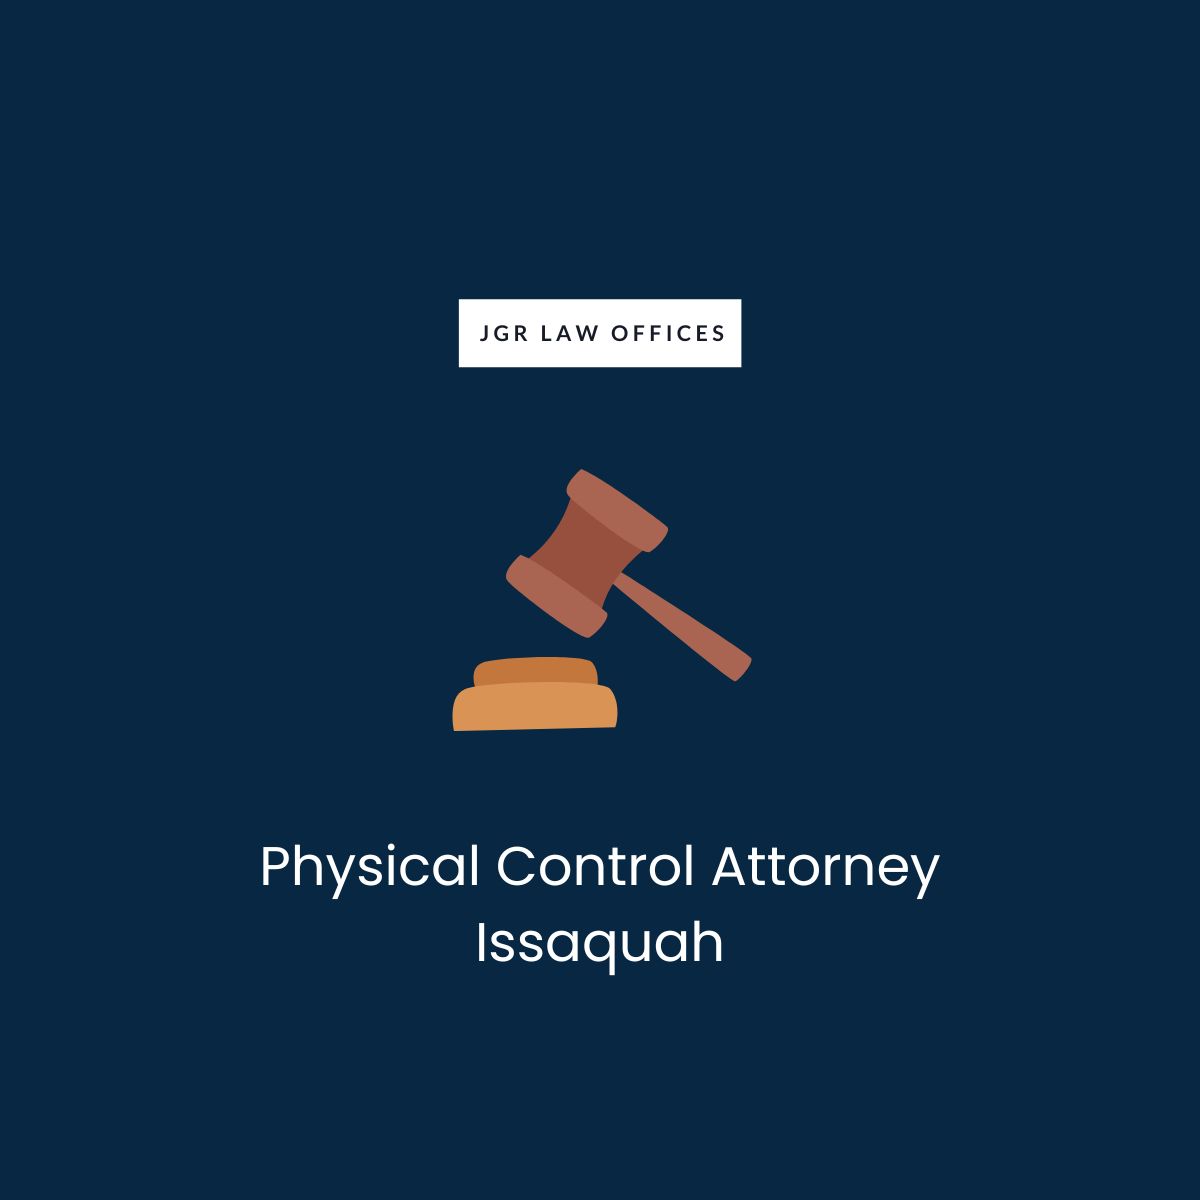 Physical Control Attorney Issaquah